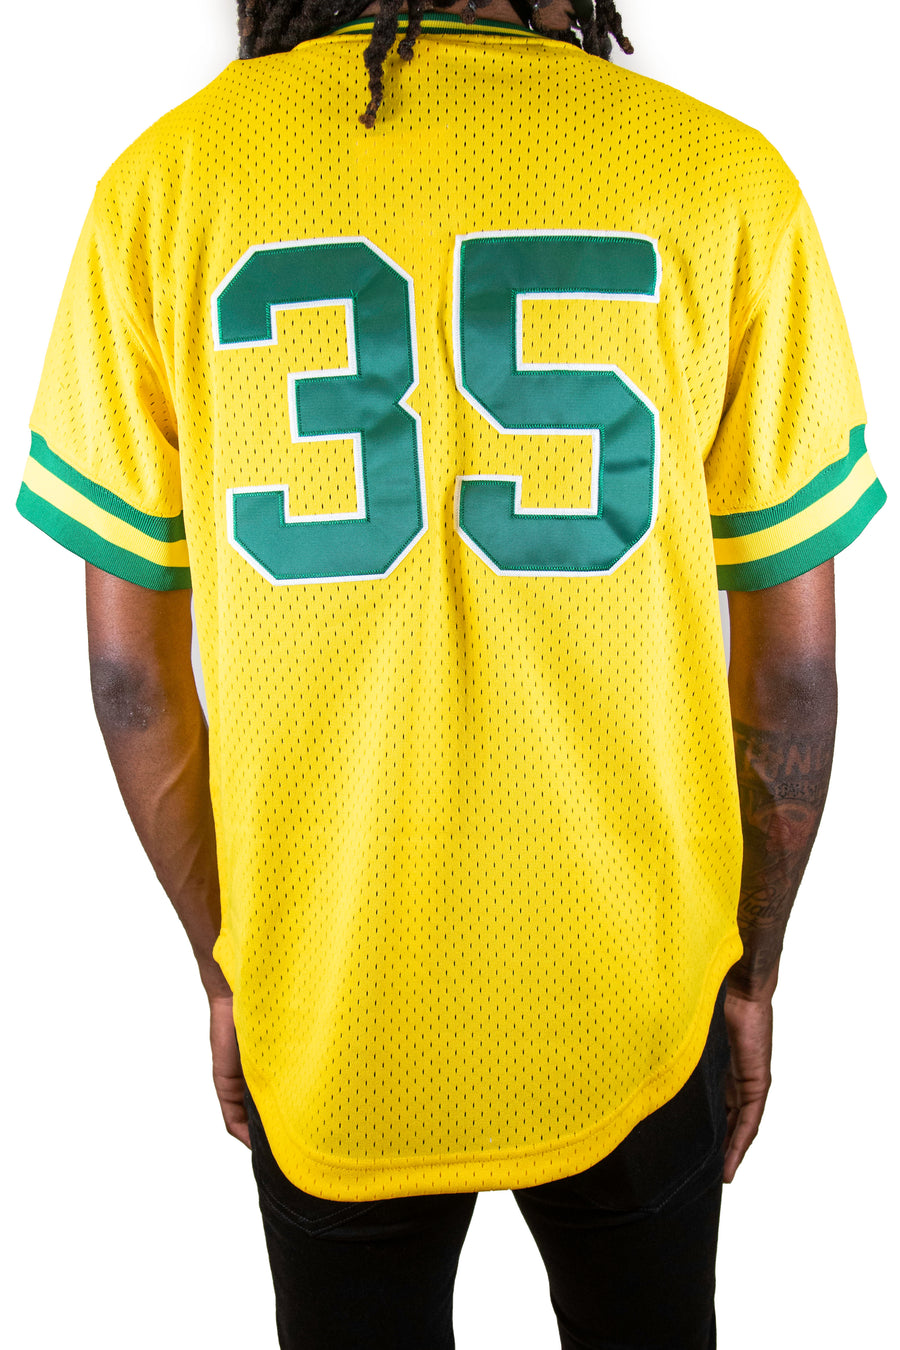 Mitchell & Ness: Cooperstown Jersey Oakland A's (Rickey Henderson)